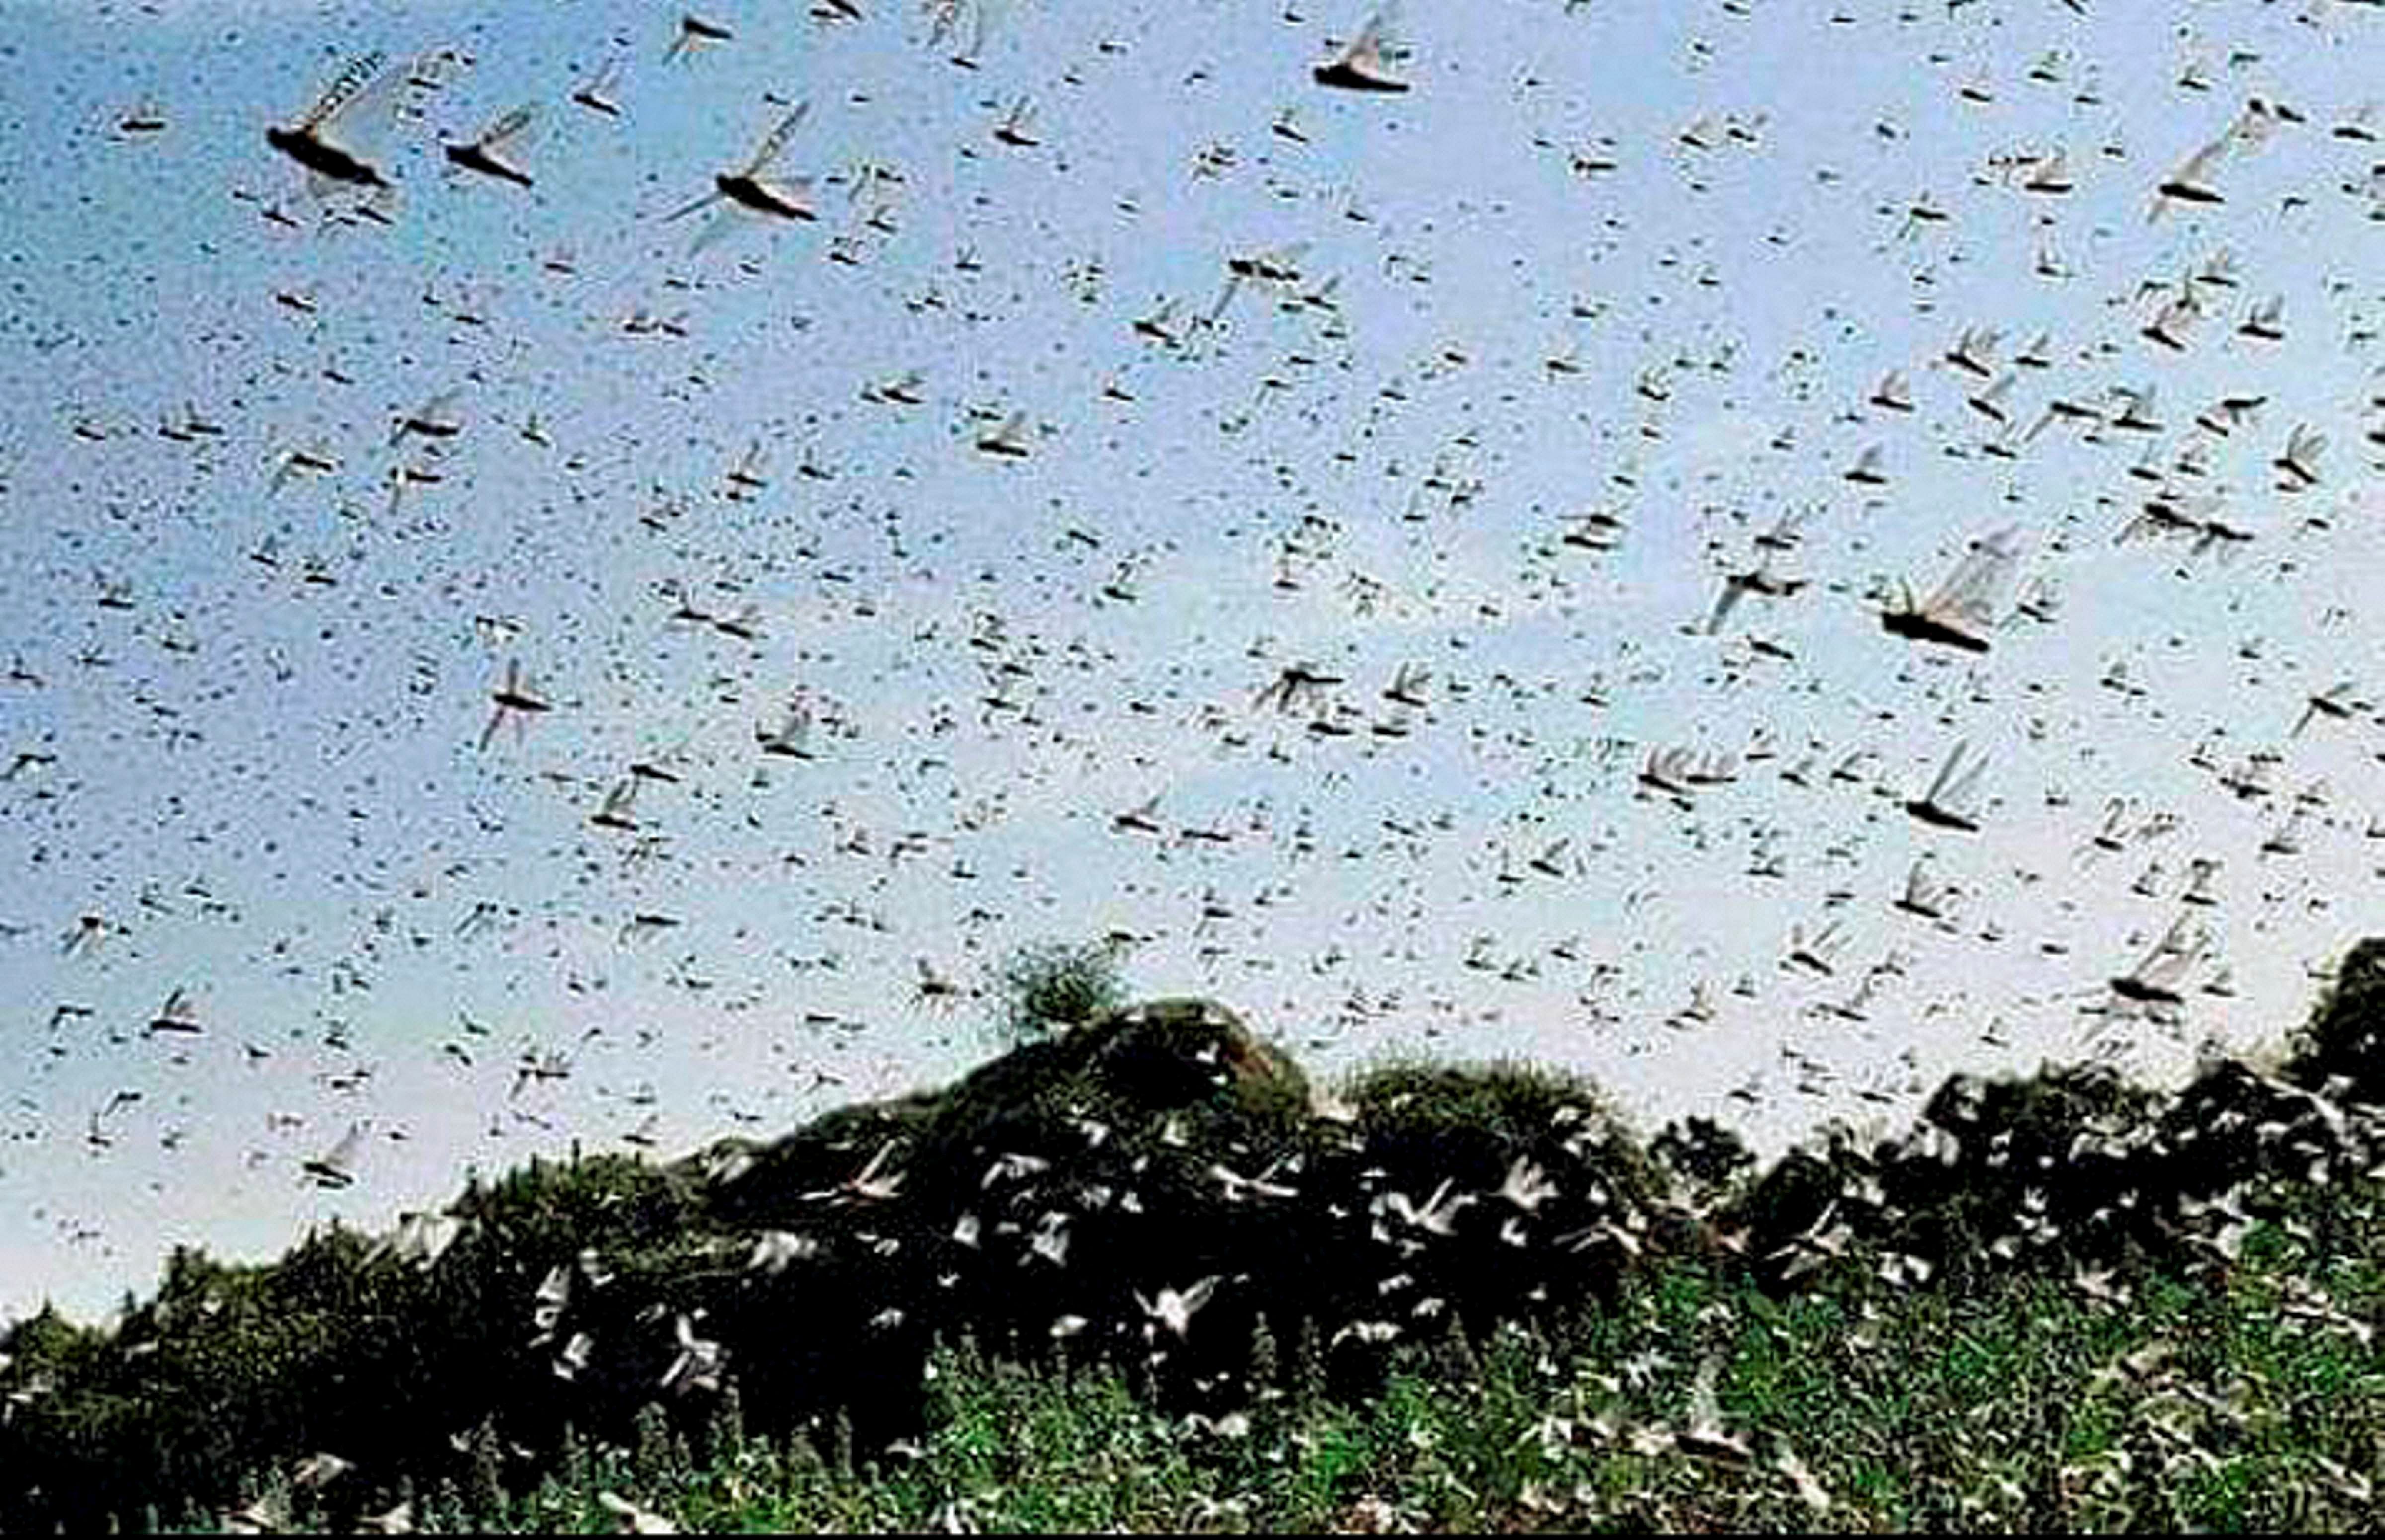 June-July marks the breeding season for the desert locust which have swarmed the four states, threatening the vegetables and fruits planted by farmers. (Credit: PTI Photo)